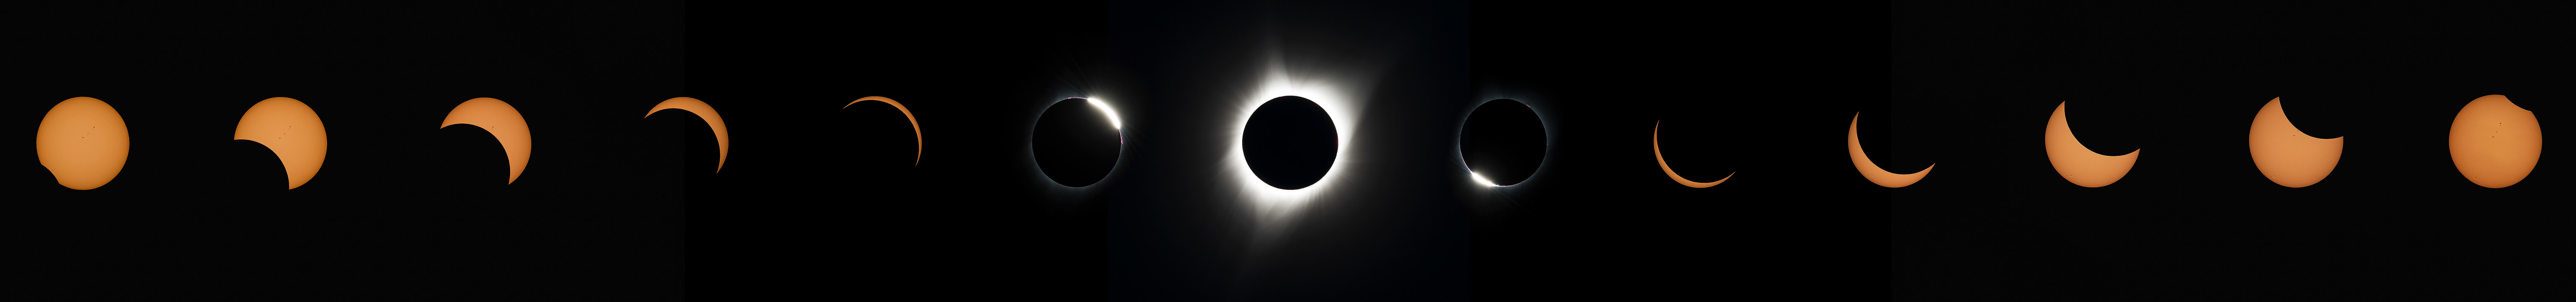 Total Eclipse sequence